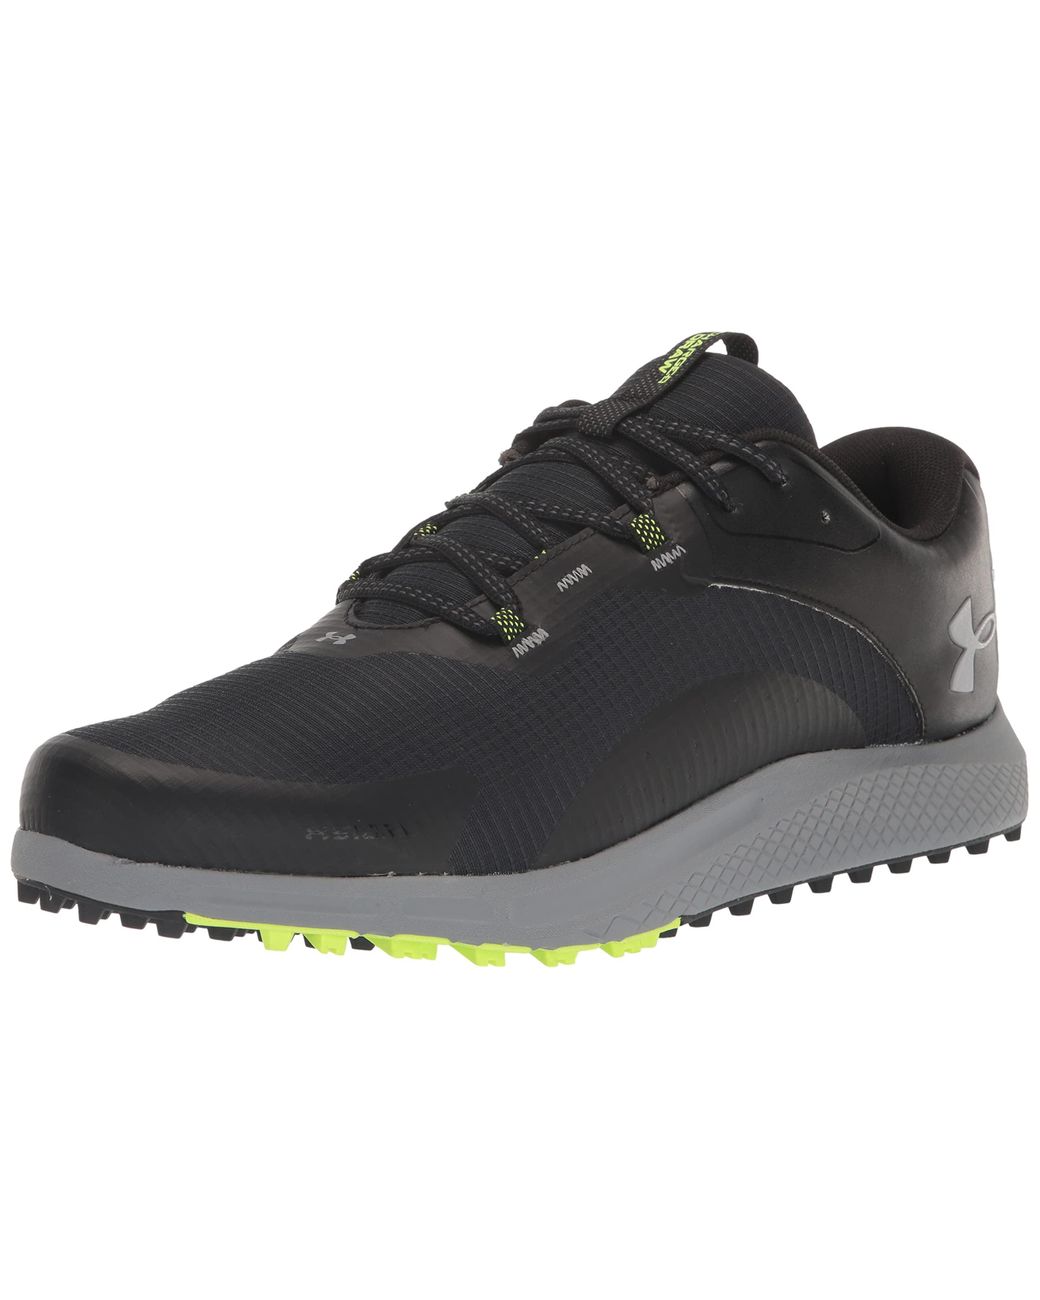 Under Armour Charged Draw 2 Spikeless Cleat Golf Shoe, in Black for Men ...